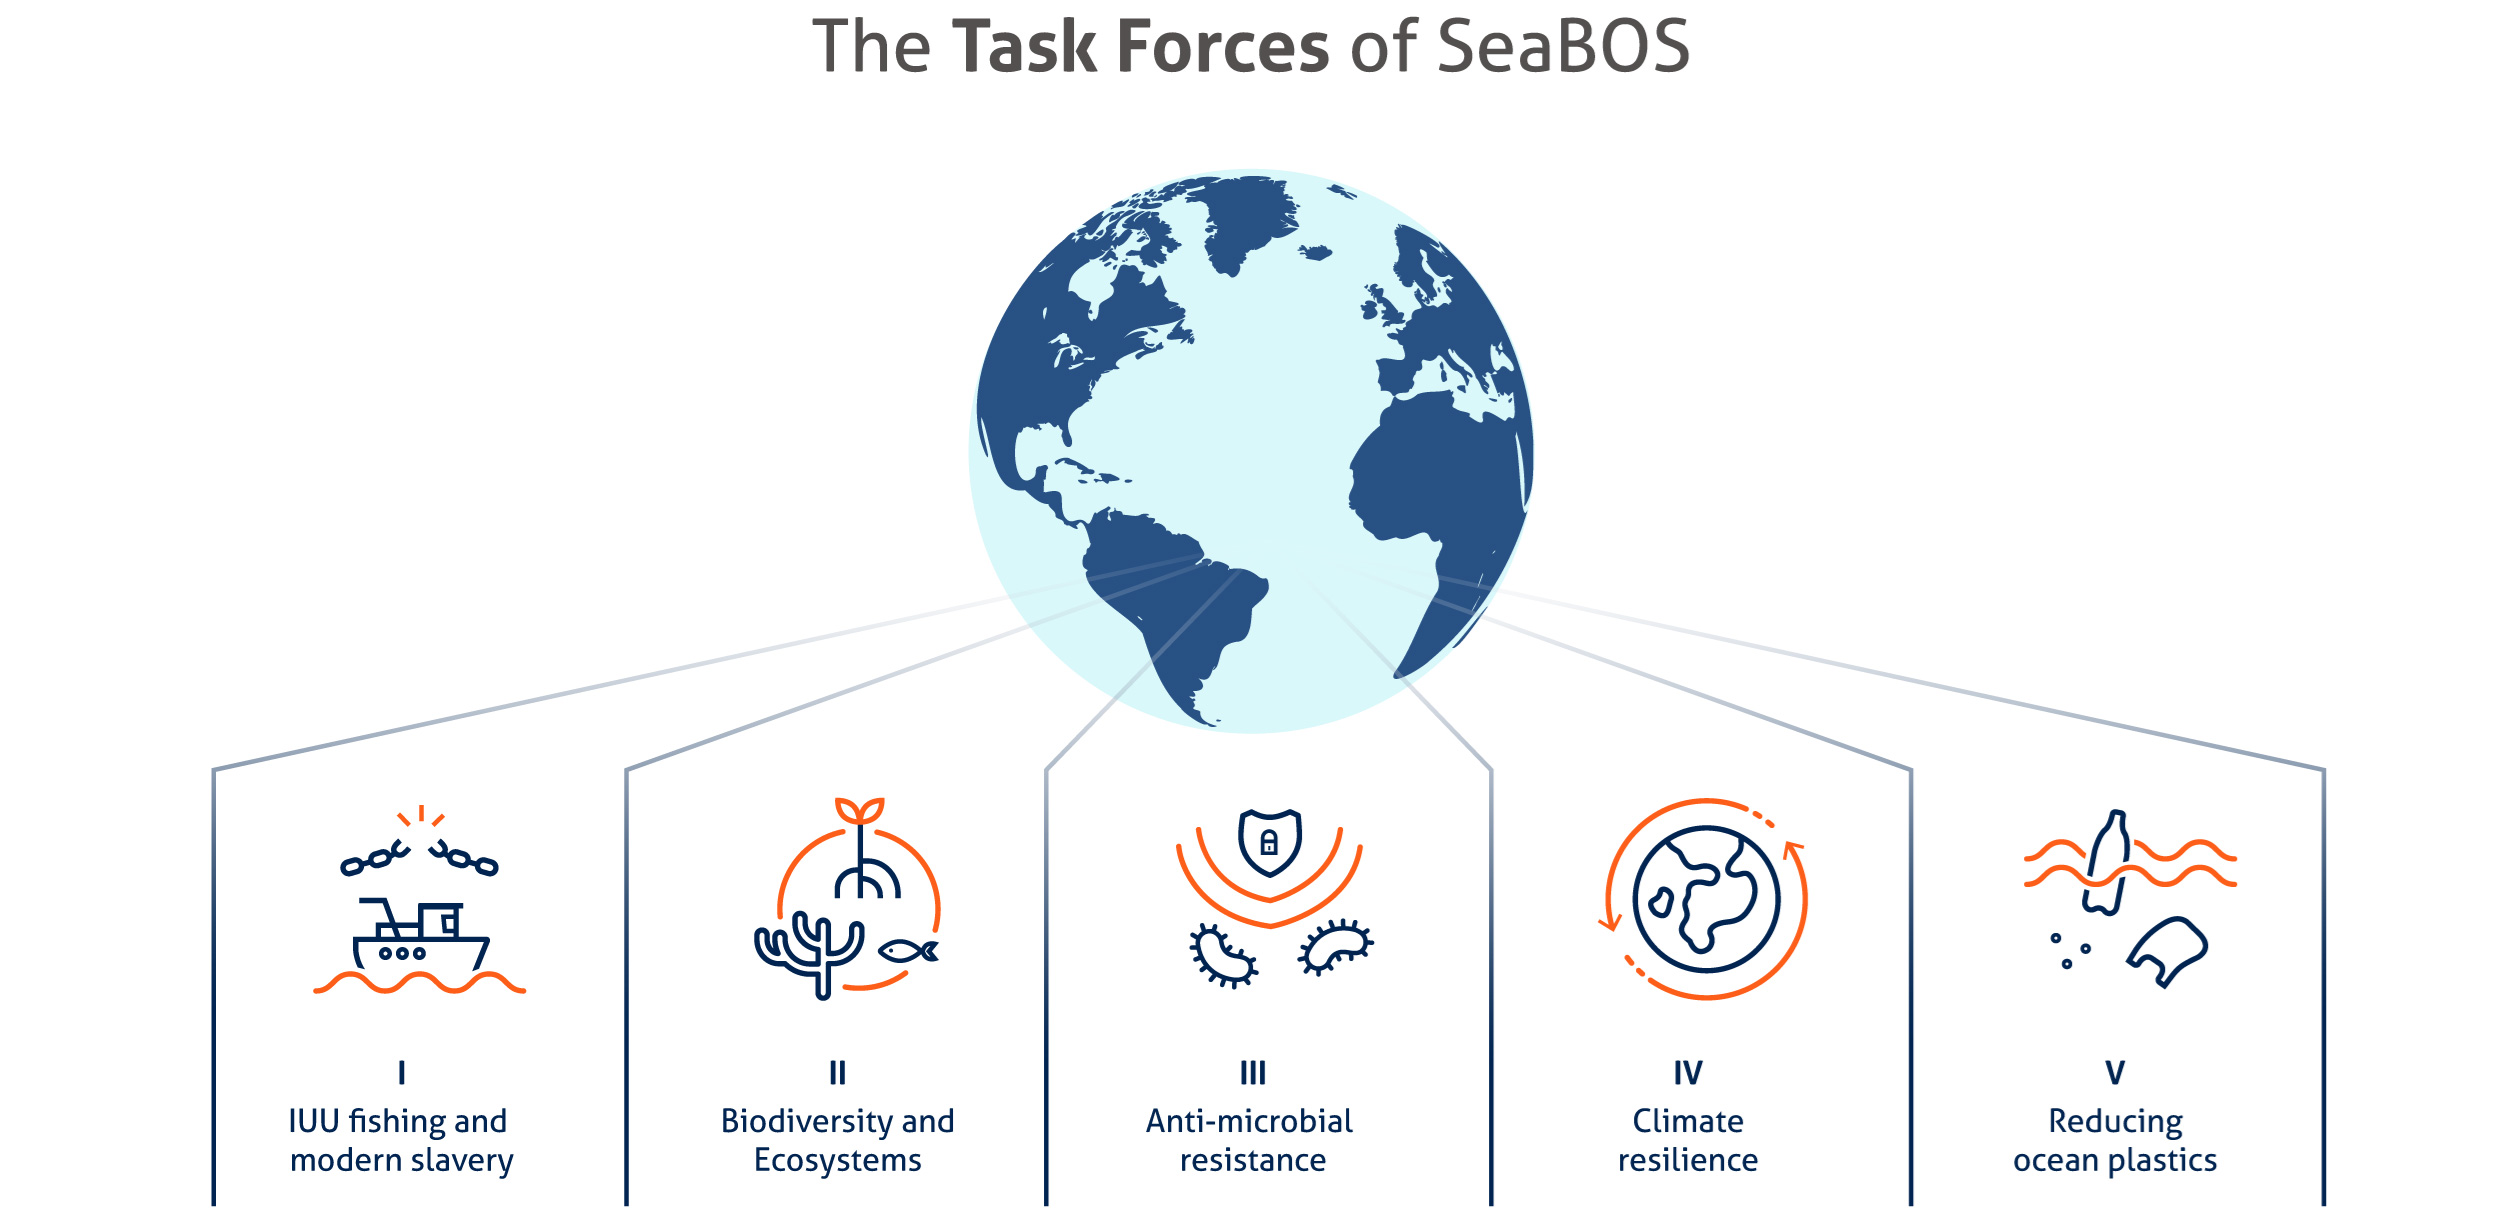 [Figure] The Task Forces of SeaBOS (From SeaBOS materials)